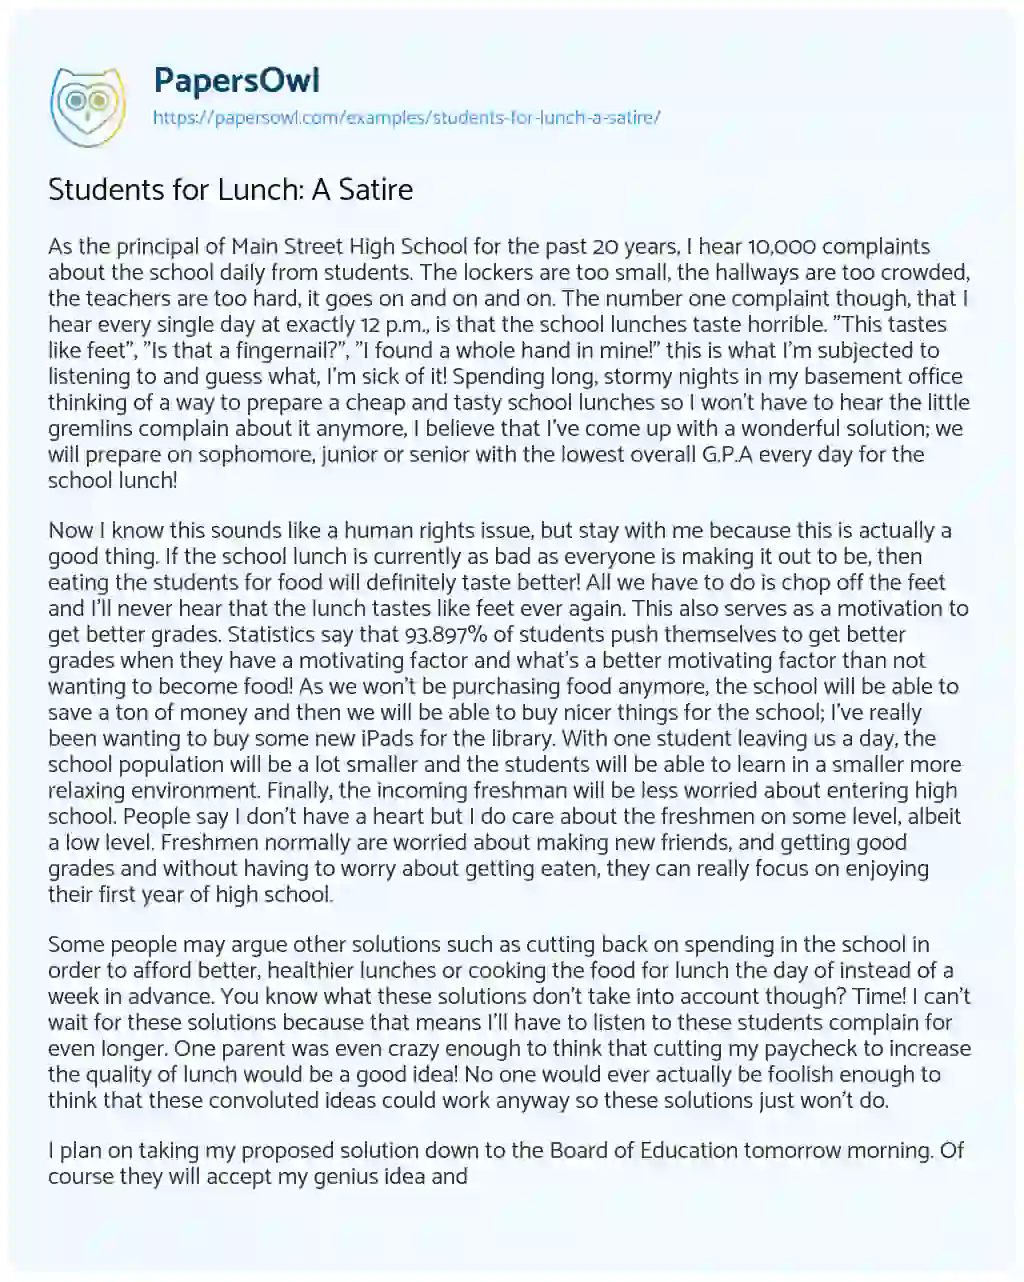 satire essay about school lunches